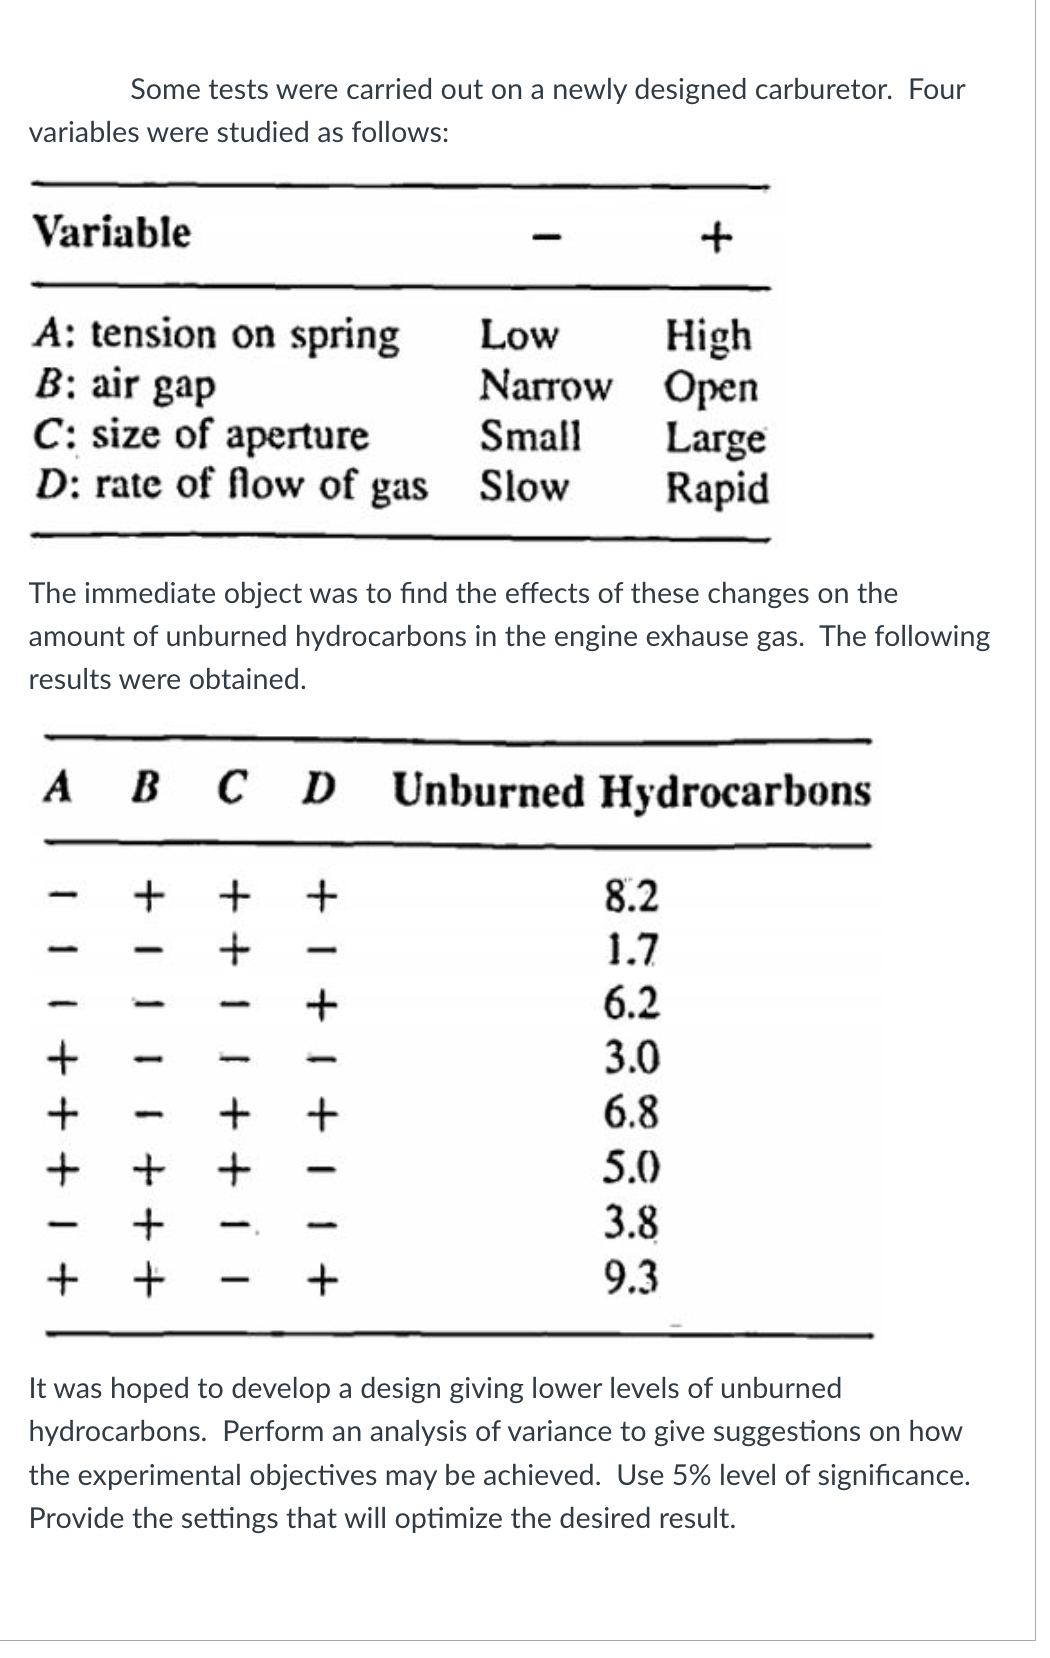 Some tests were carried out on a newly designed carburetor. Four
variables were studied as follows:
Variable
A: tension on spring
B: air gap
Low
Narrow
C: size of aperture
Small
D: rate of flow of gas Slow
A B C
The immediate object was to find the effects of these changes on the
amount of unburned hydrocarbons in the engine exhause gas. The following
results were obtained.
11+
+1 +
+1
1
1
1
1 + + 1
+++
++1
+ +
D
+1+1+11+
High
Open
Large
Rapid
+
Unburned Hydrocarbons
8.2
1.7
6.2
3.0
6.8
5.0
3.8
9.3
It was hoped to develop a design giving lower levels of unburned
hydrocarbons. Perform an analysis of variance to give suggestions on how
the experimental objectives may be achieved. Use 5% level of significance.
Provide the settings that will optimize the desired result.